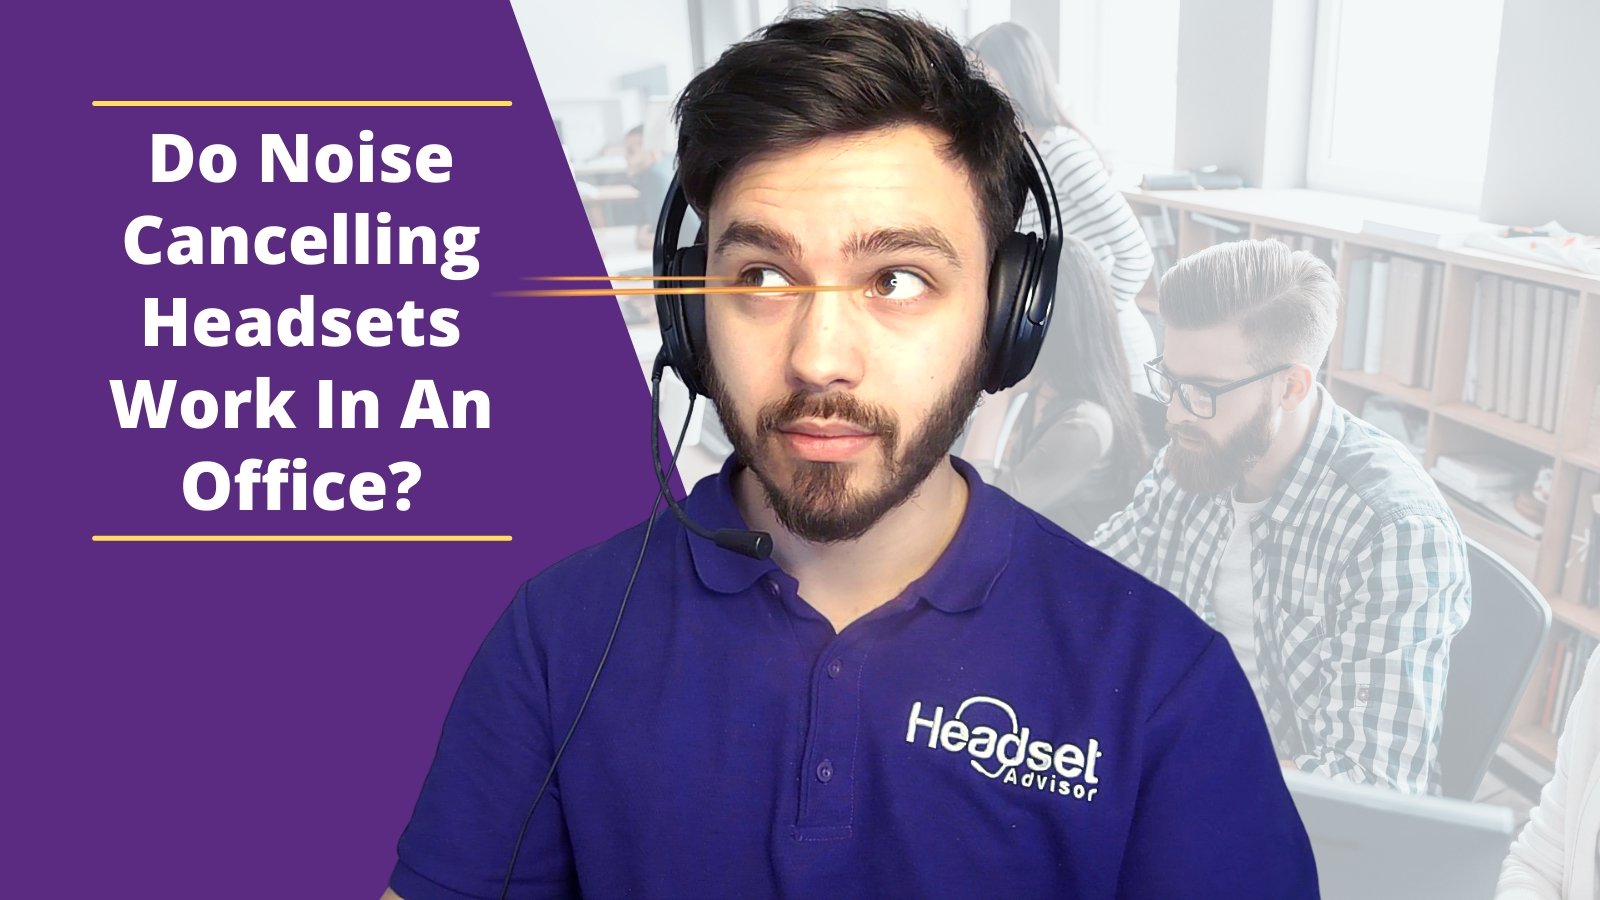 Do Noise Cancelling Headsets Work In An Office? - Headset Advisor